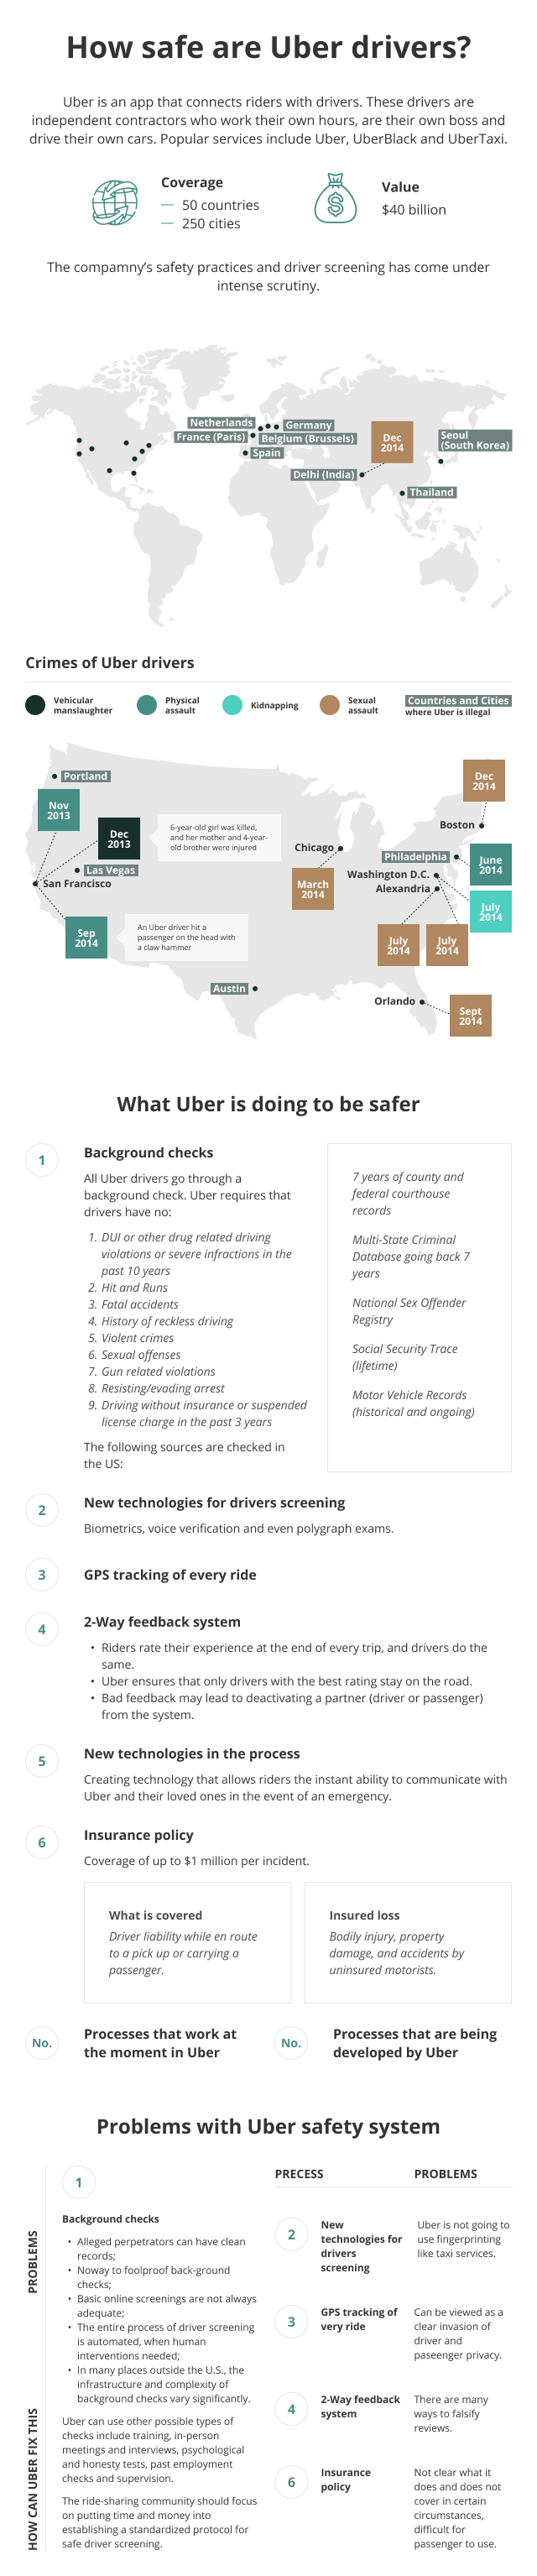 How safe are Uber drivers